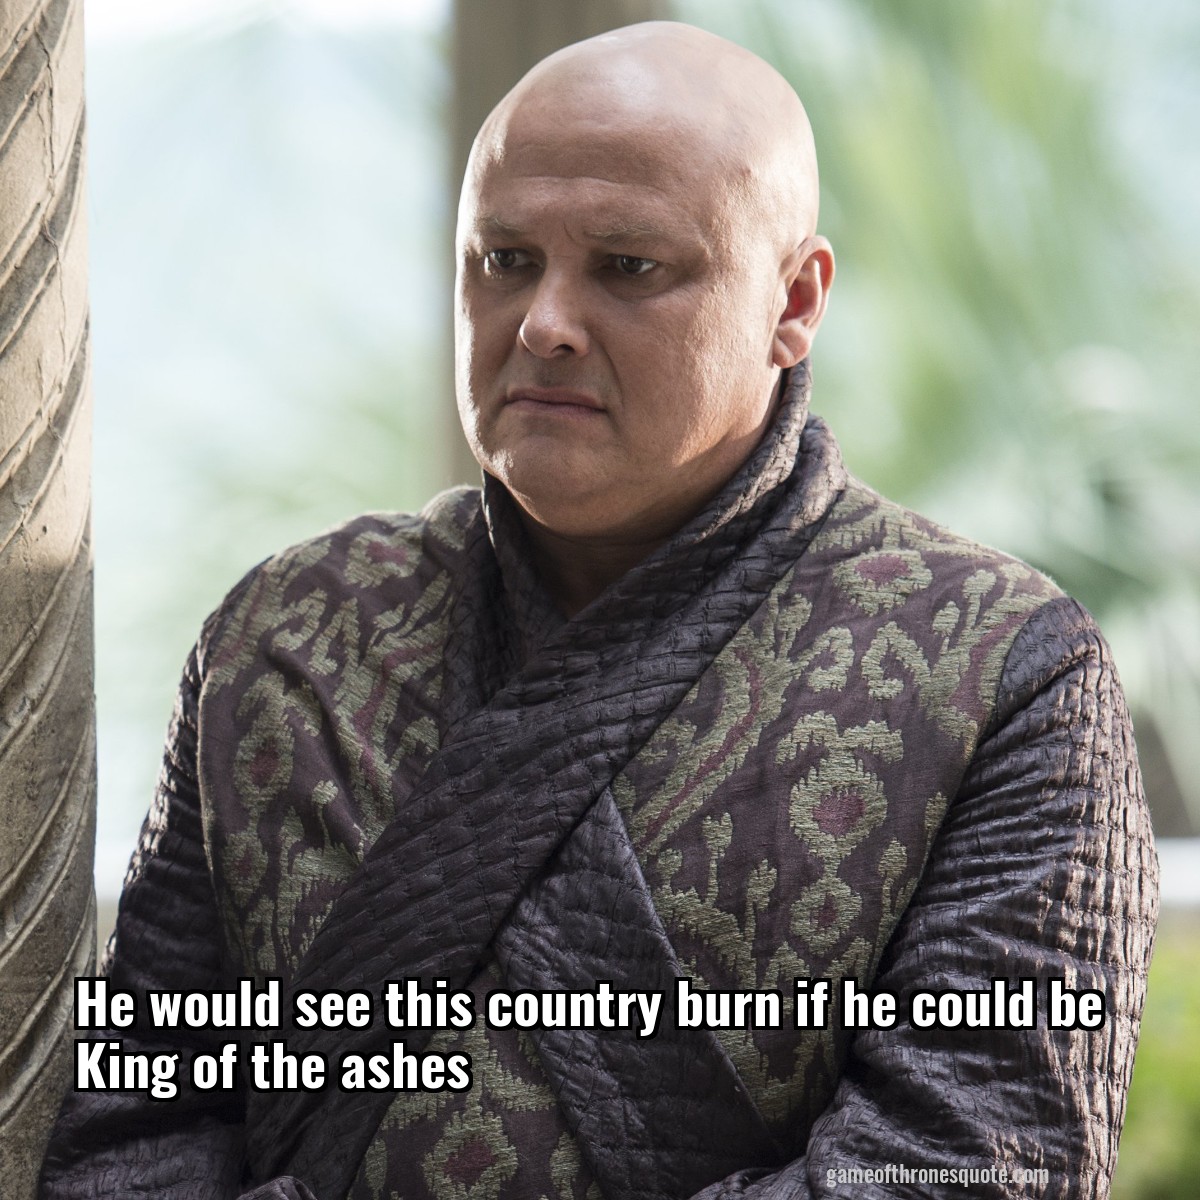 He would see this country burn if he could be King of the ashes